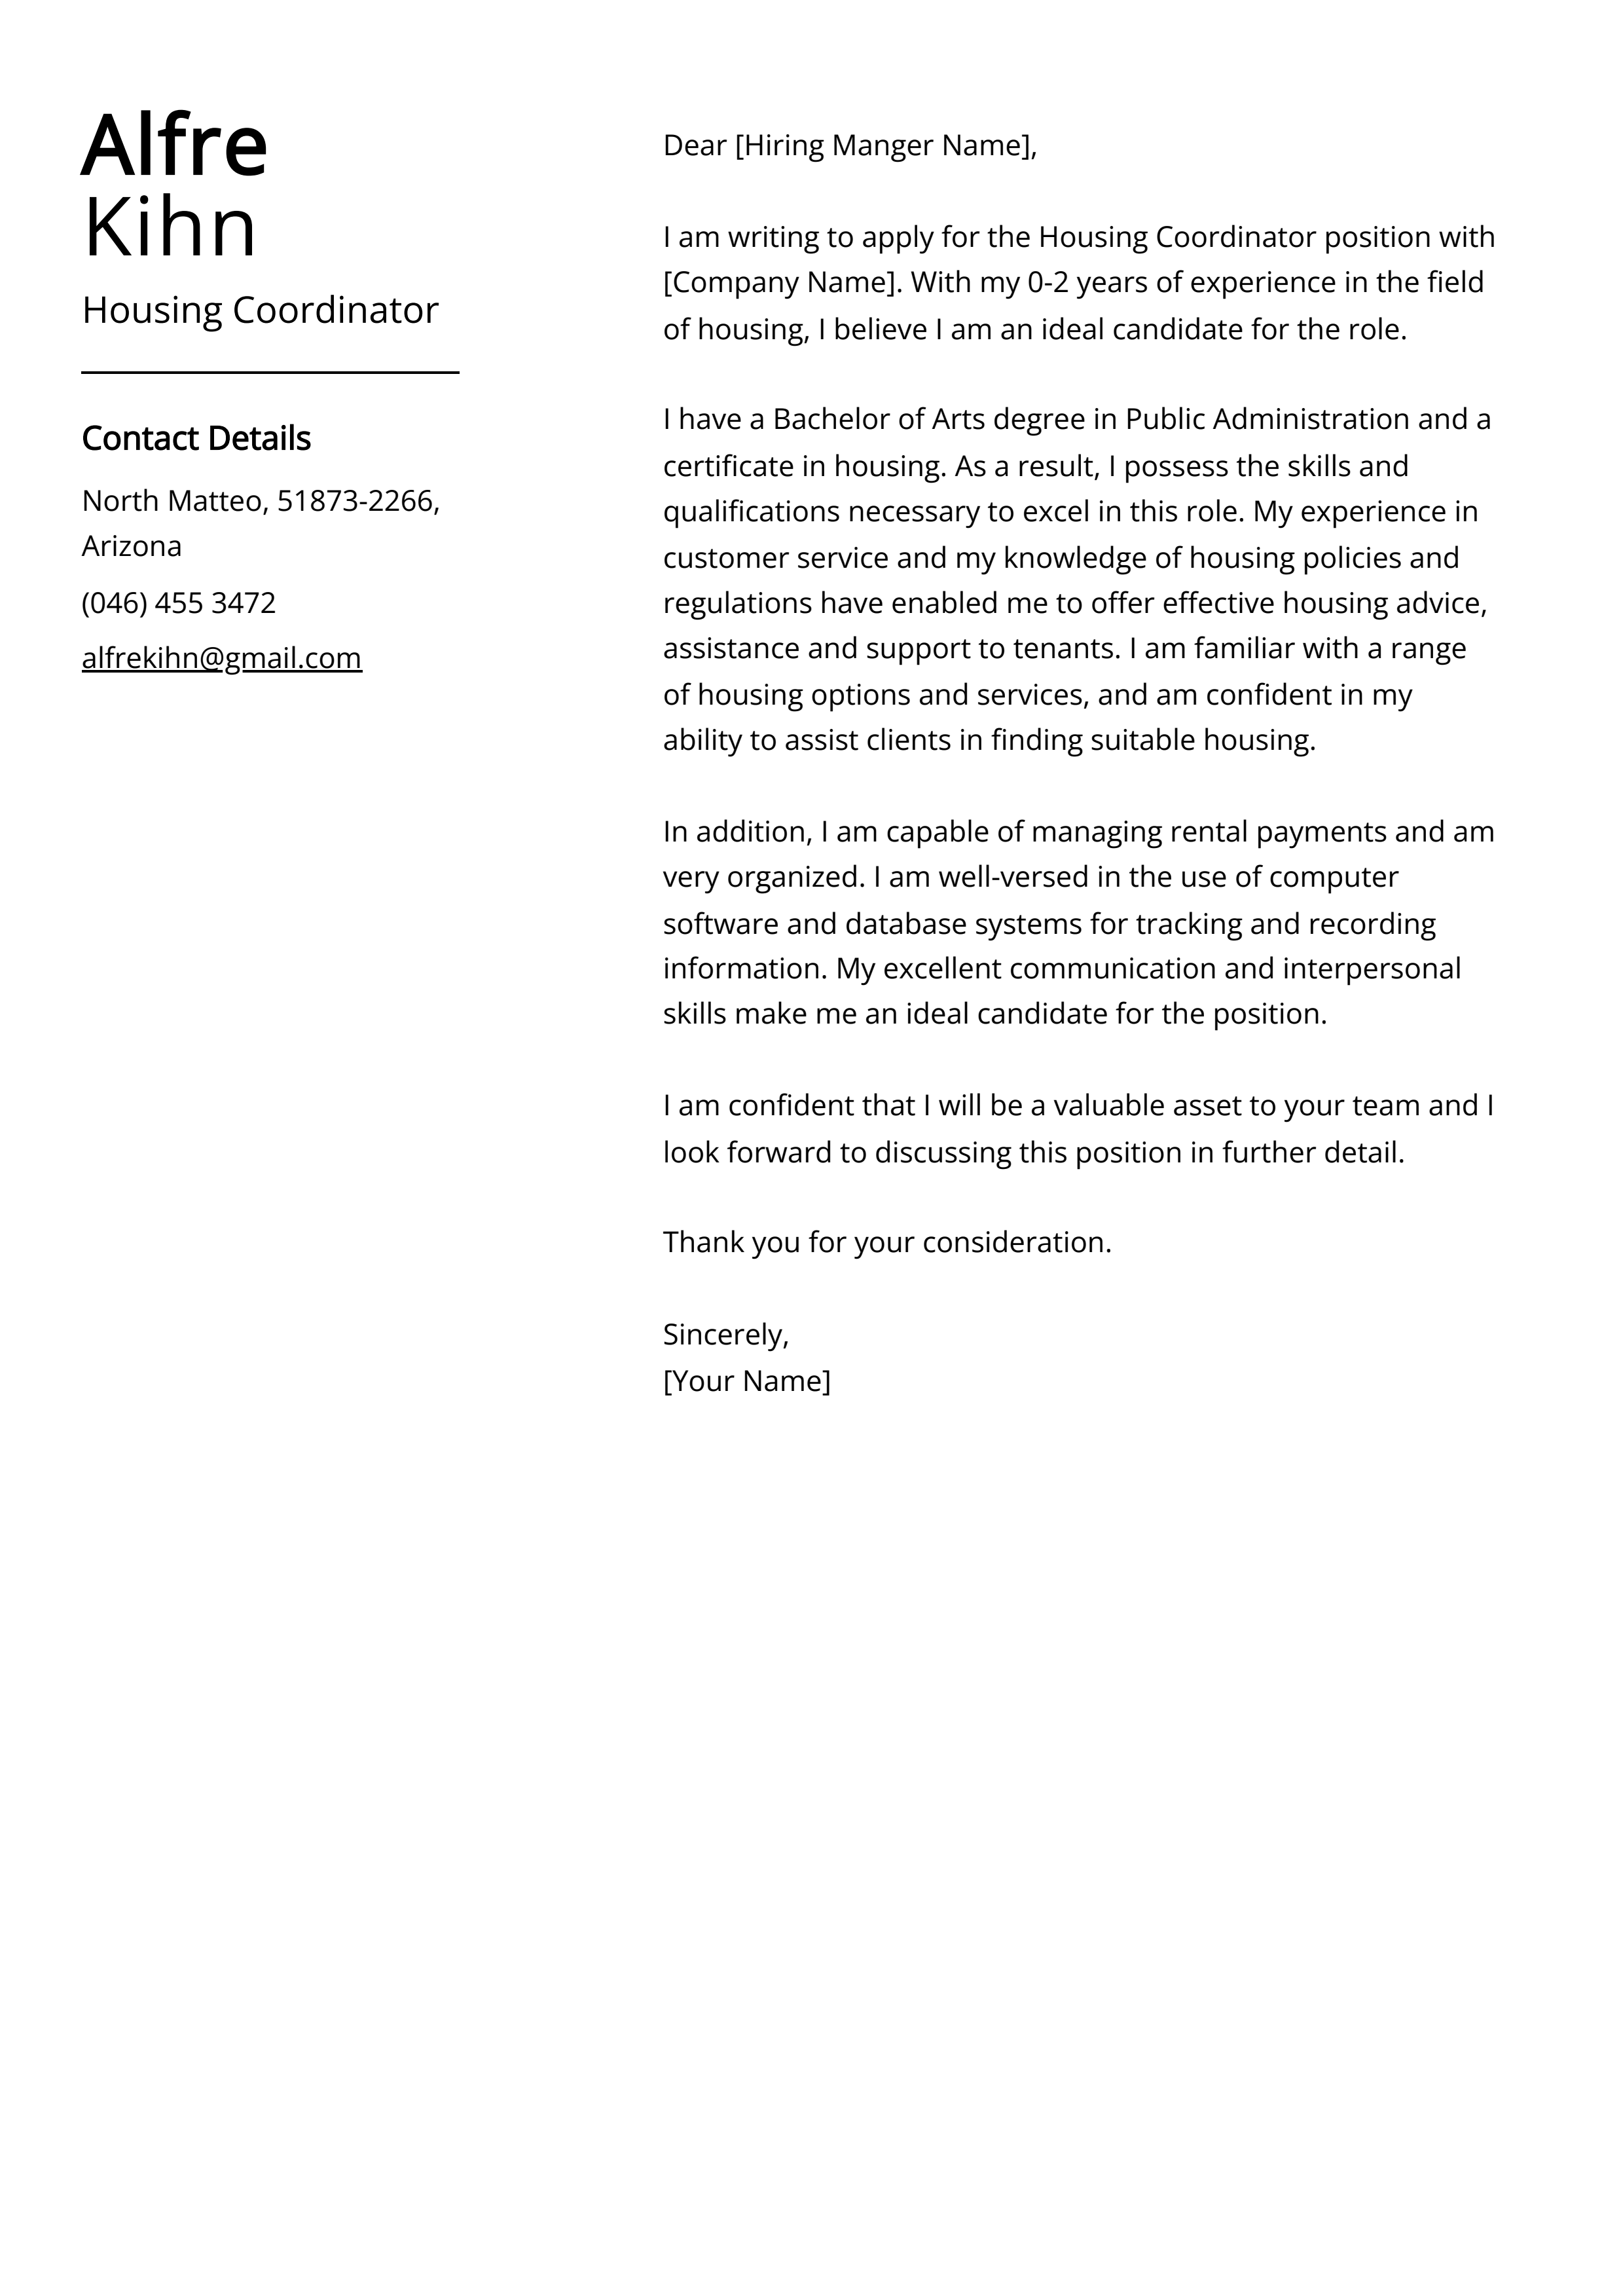 Housing Coordinator Cover Letter Example